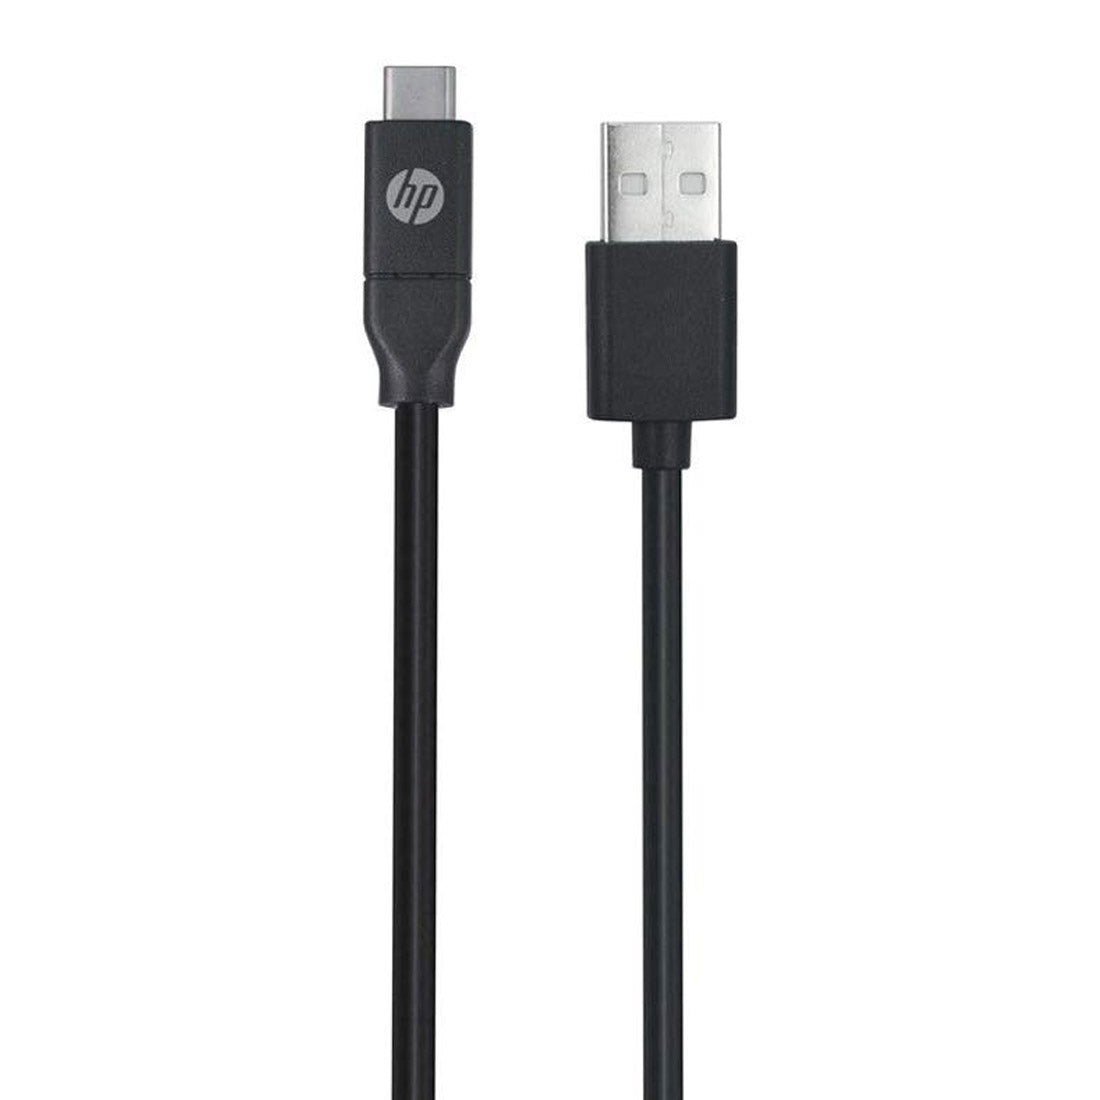 HP USB-A to USB-C 3 Meter Long Charging Cable with 480 Mbps Data Transfer Rate